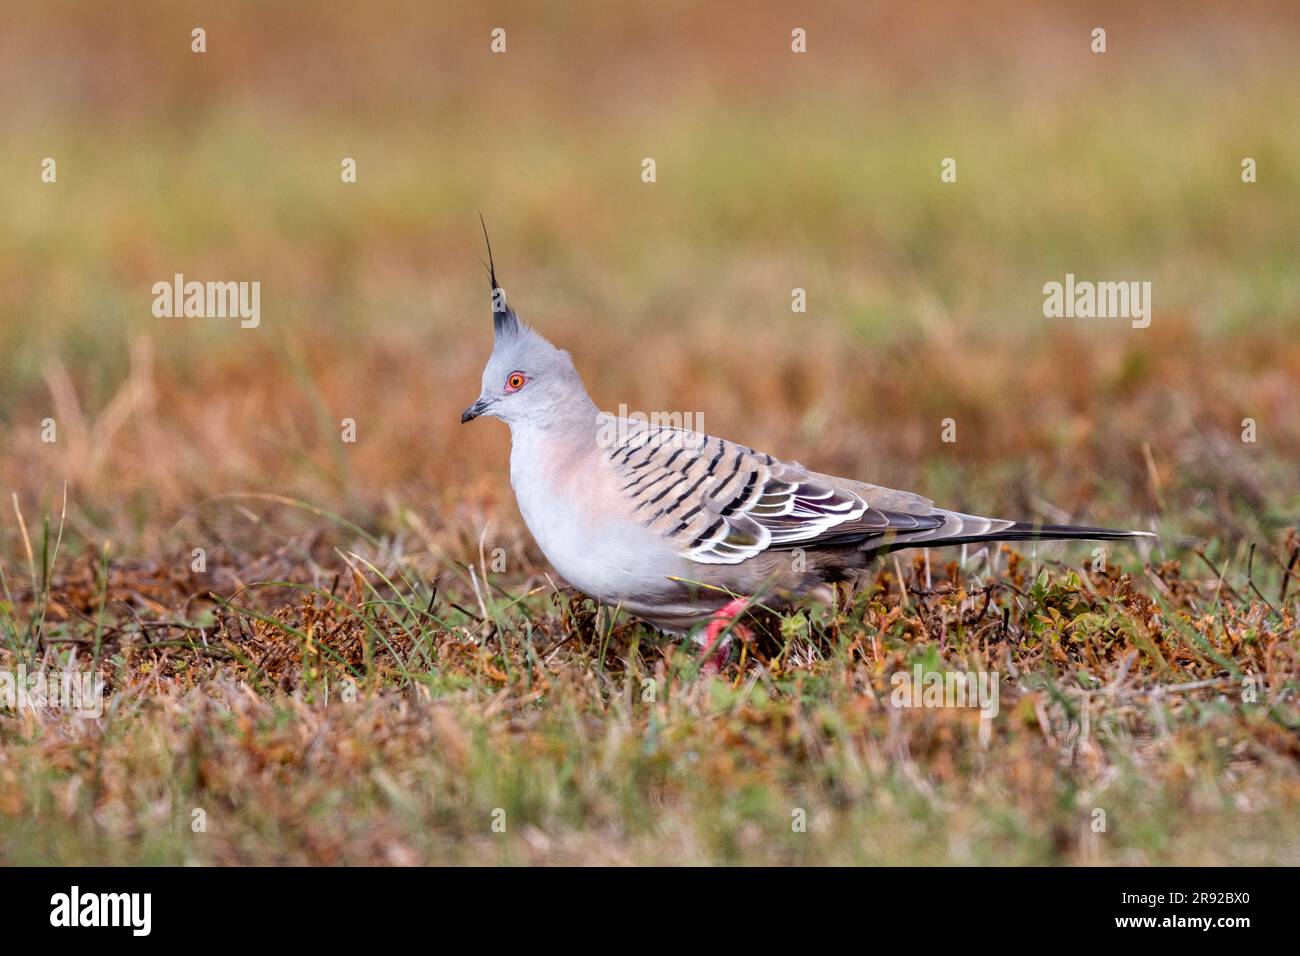 crested pigeon (Ocyphaps lophotes), sitting on the ground, Australia, South Australia Stock Photo